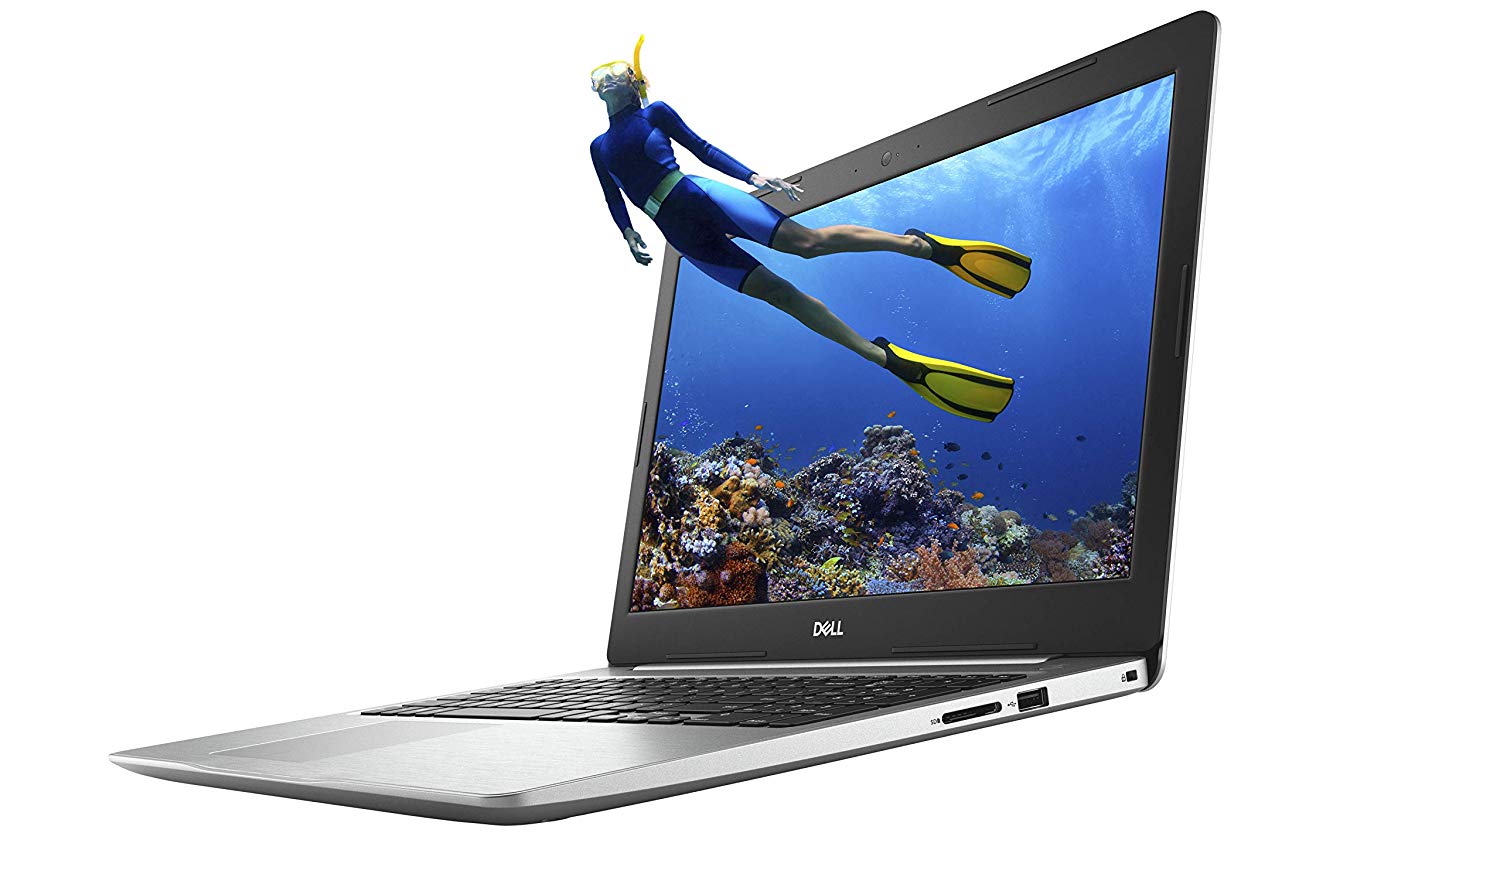 Dell Inspiron 15 5000 Review ★★★★★★☆☆☆☆ 6.6 - Pro Laptop Reviews UK